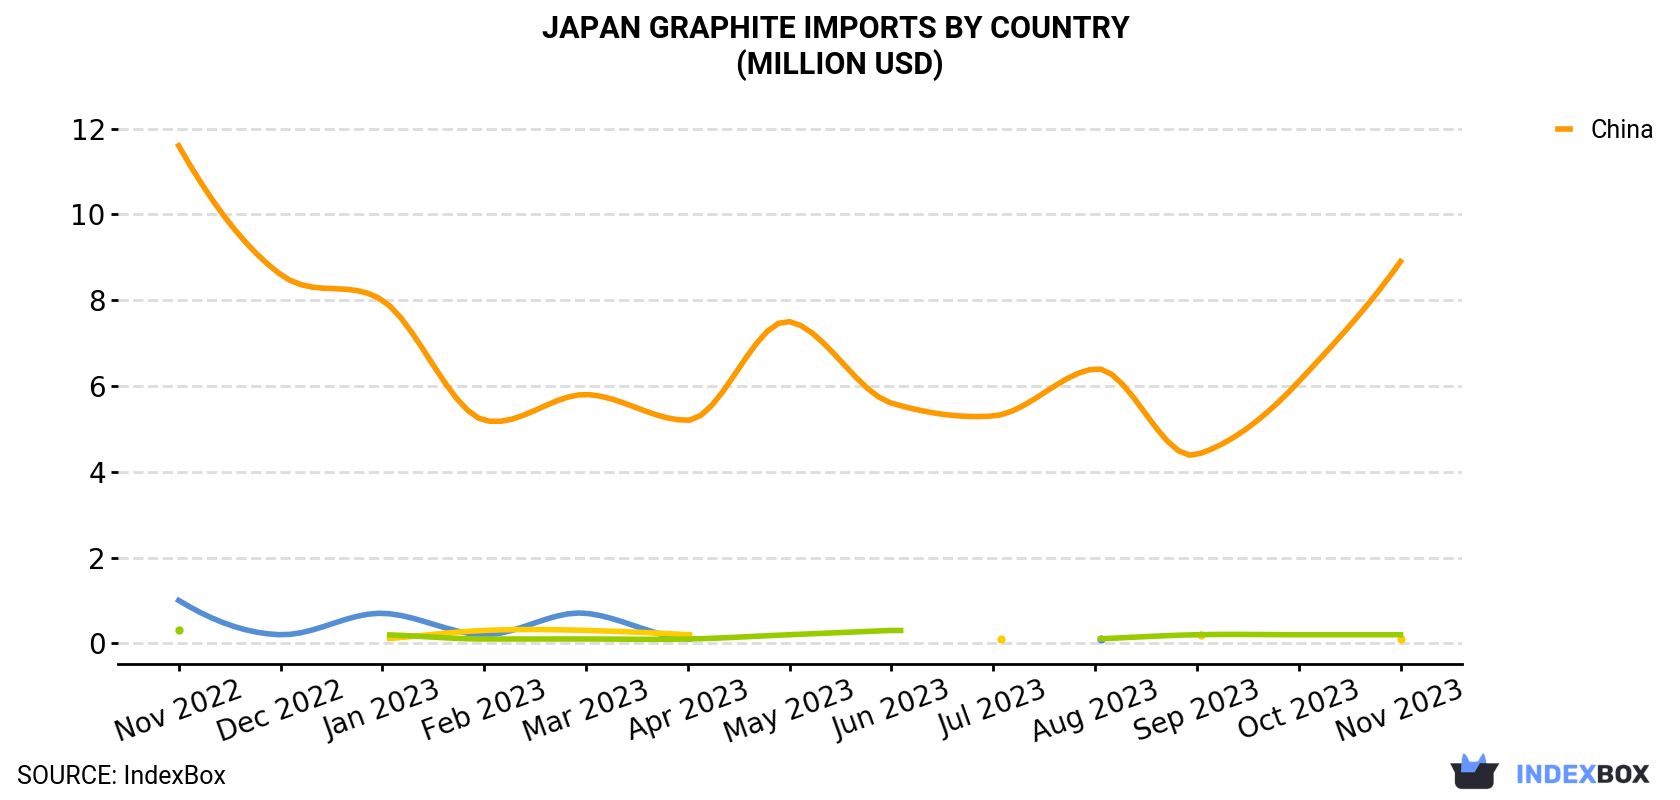 Japan Graphite Imports By Country (Million USD)